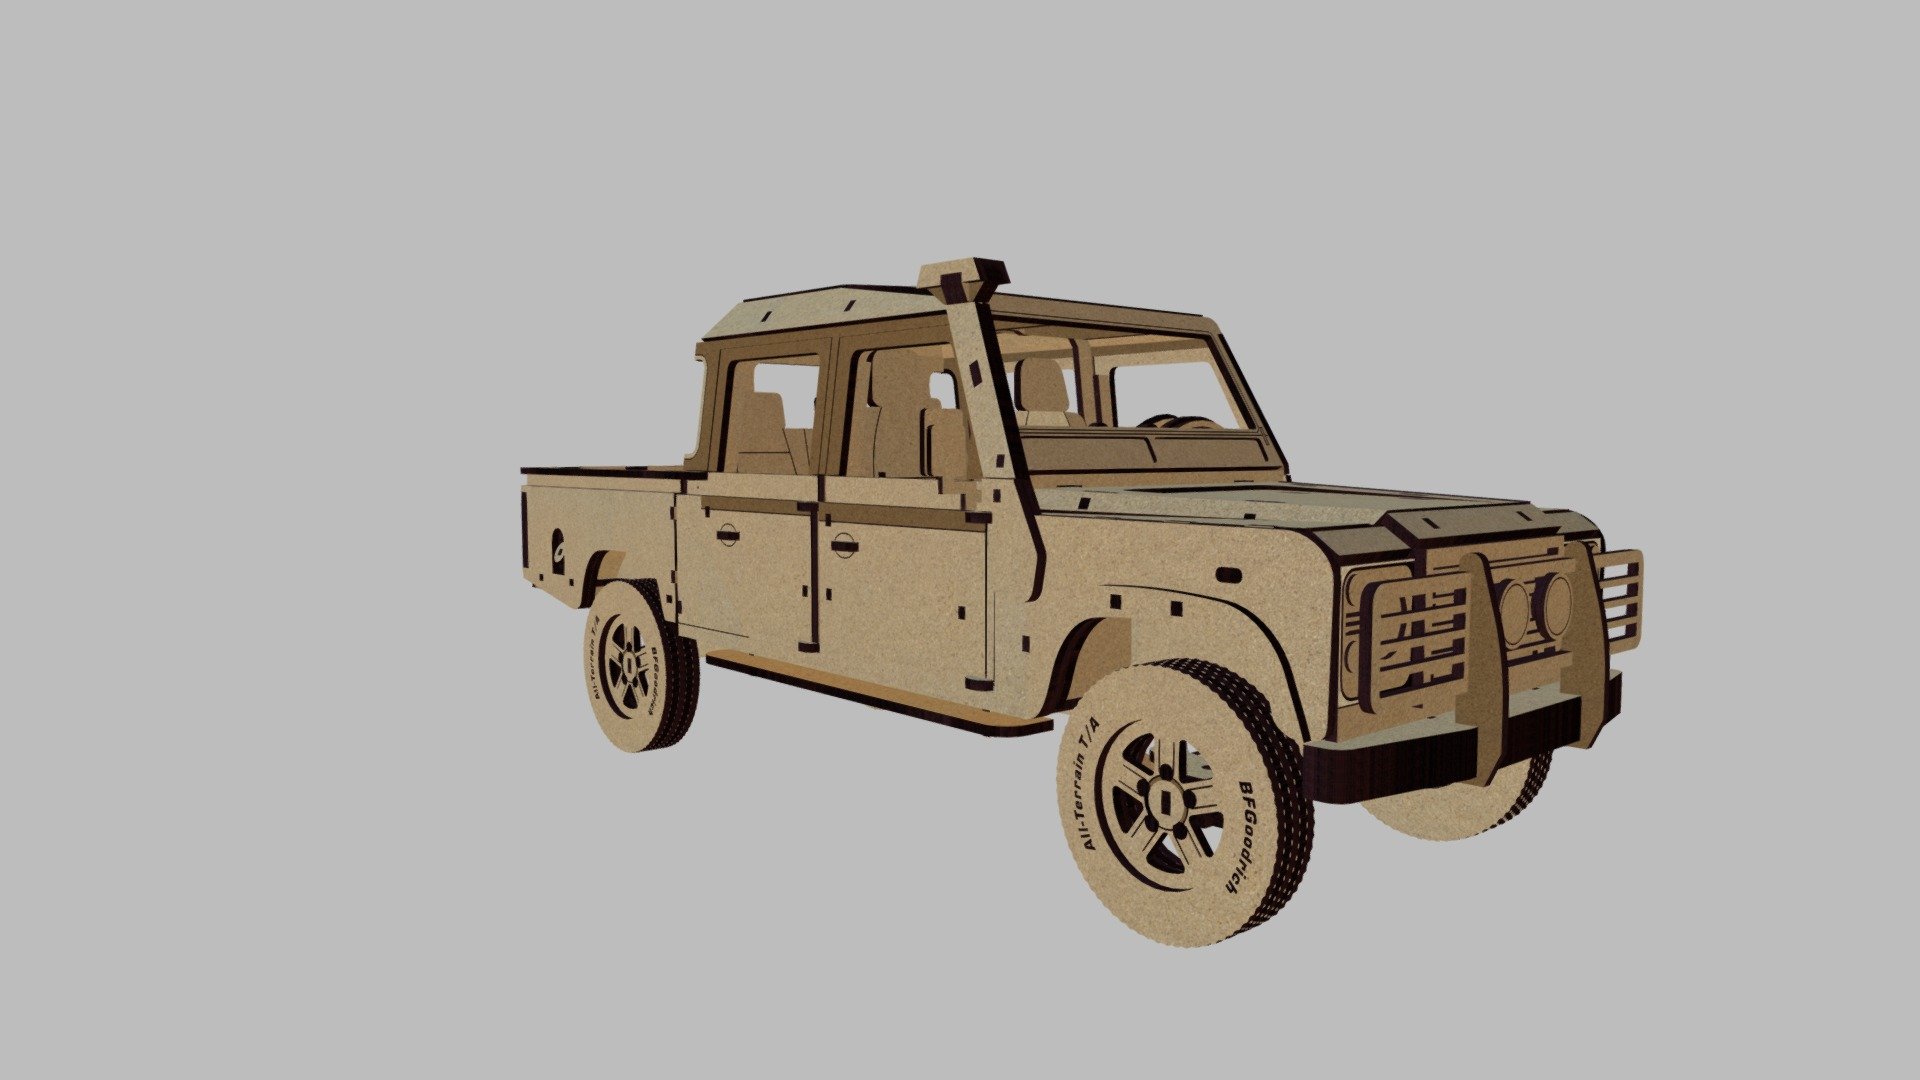 A 3D Puzzle design that was made based on the Land Rover Defender 130 model 3d model